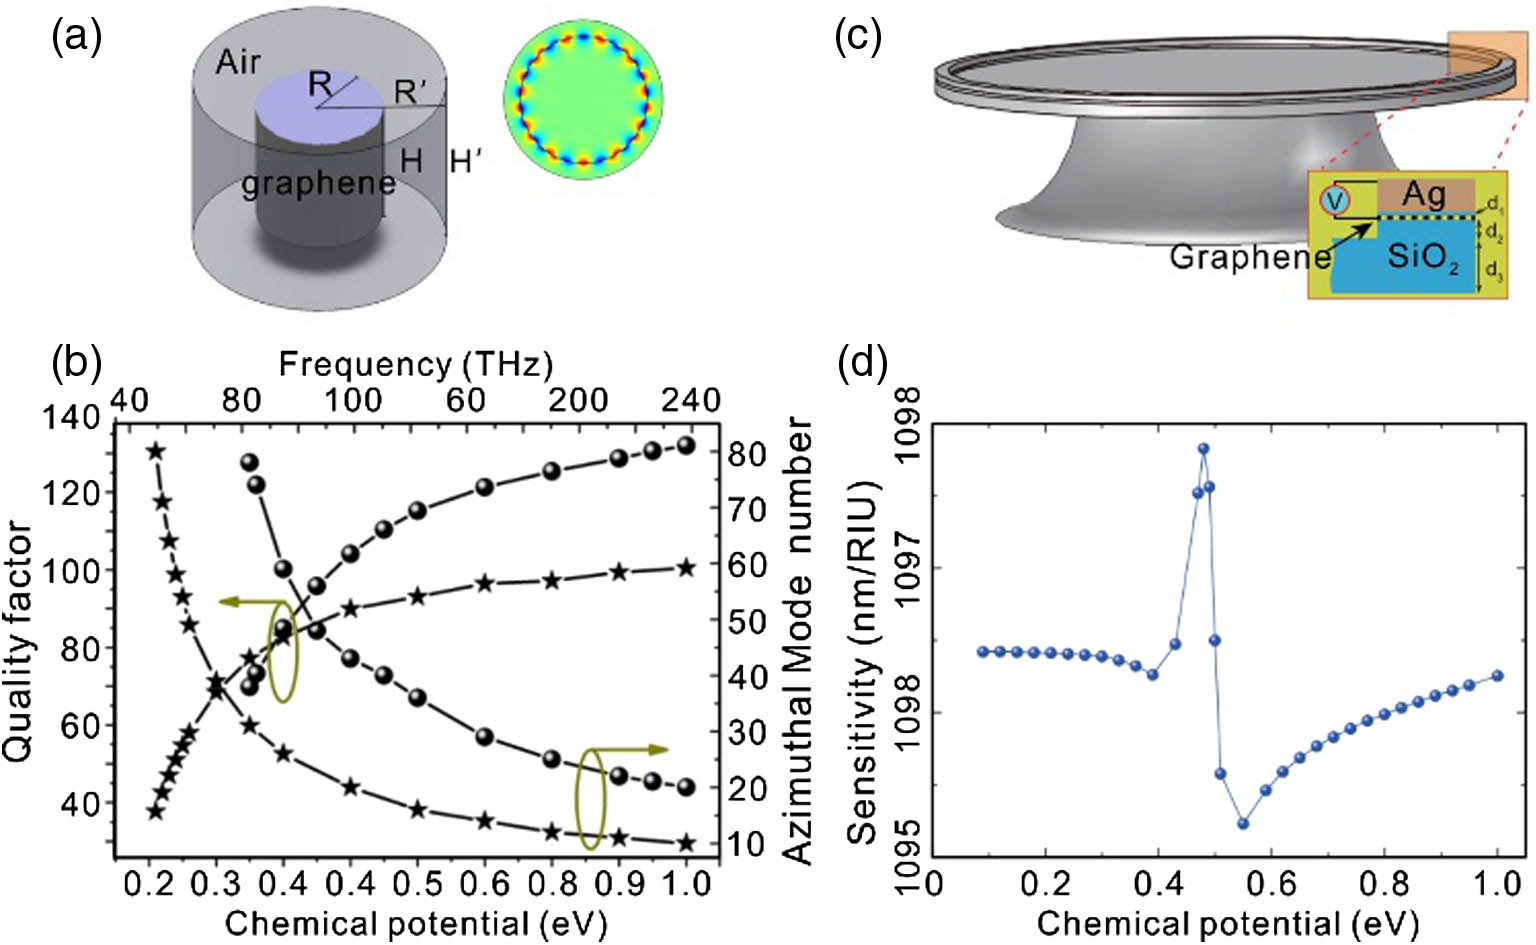 (a) Schematic of the graphene (dark grey) coated nanodisk (light blue) and the corresponding Comsol finite element computational window (light gray). Inset is the horizontal view of the electric field distribution [48]. (b) Q factor and azimuthal mode number as functions of the chemical potential corresponding to 63.2 and 89.4 THz [48]. (c) Schematic of graphene-integrated microdisk cavity [50]. (d) Sensitivity as a function of the chemical potential [50].